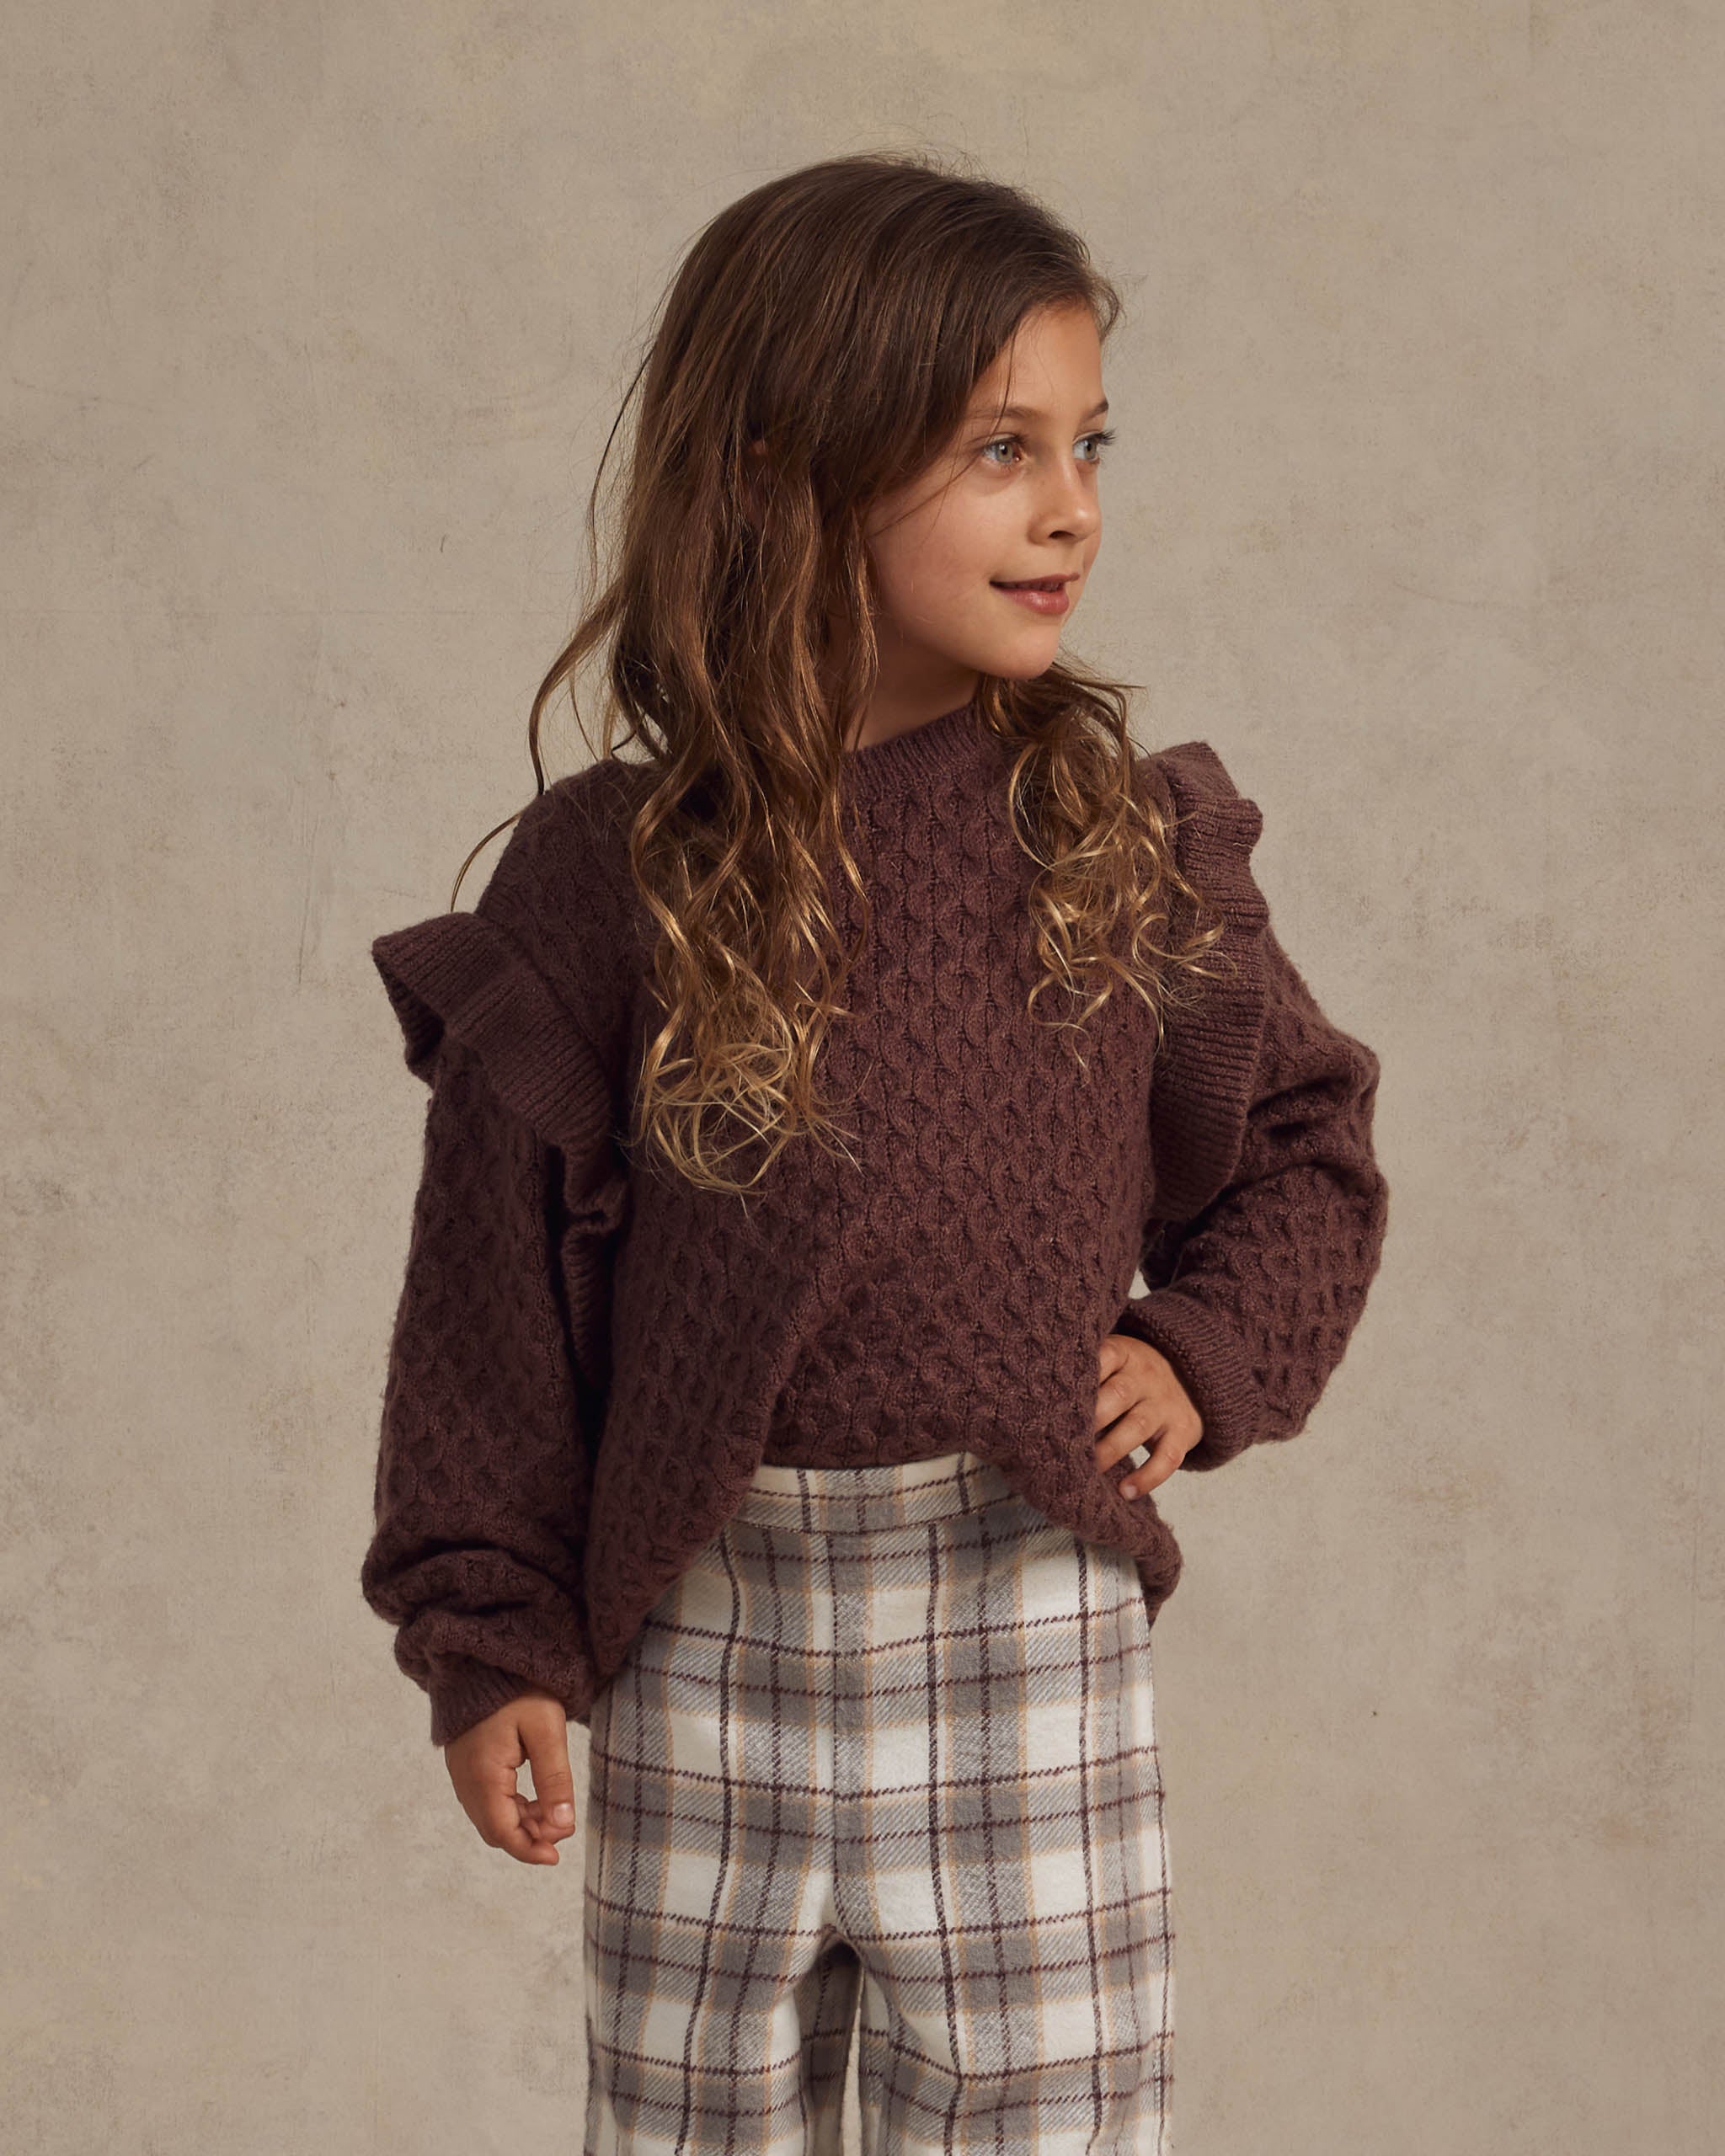 La Reina Sweater || Plum - Rylee + Cru | Kids Clothes | Trendy Baby Clothes | Modern Infant Outfits |